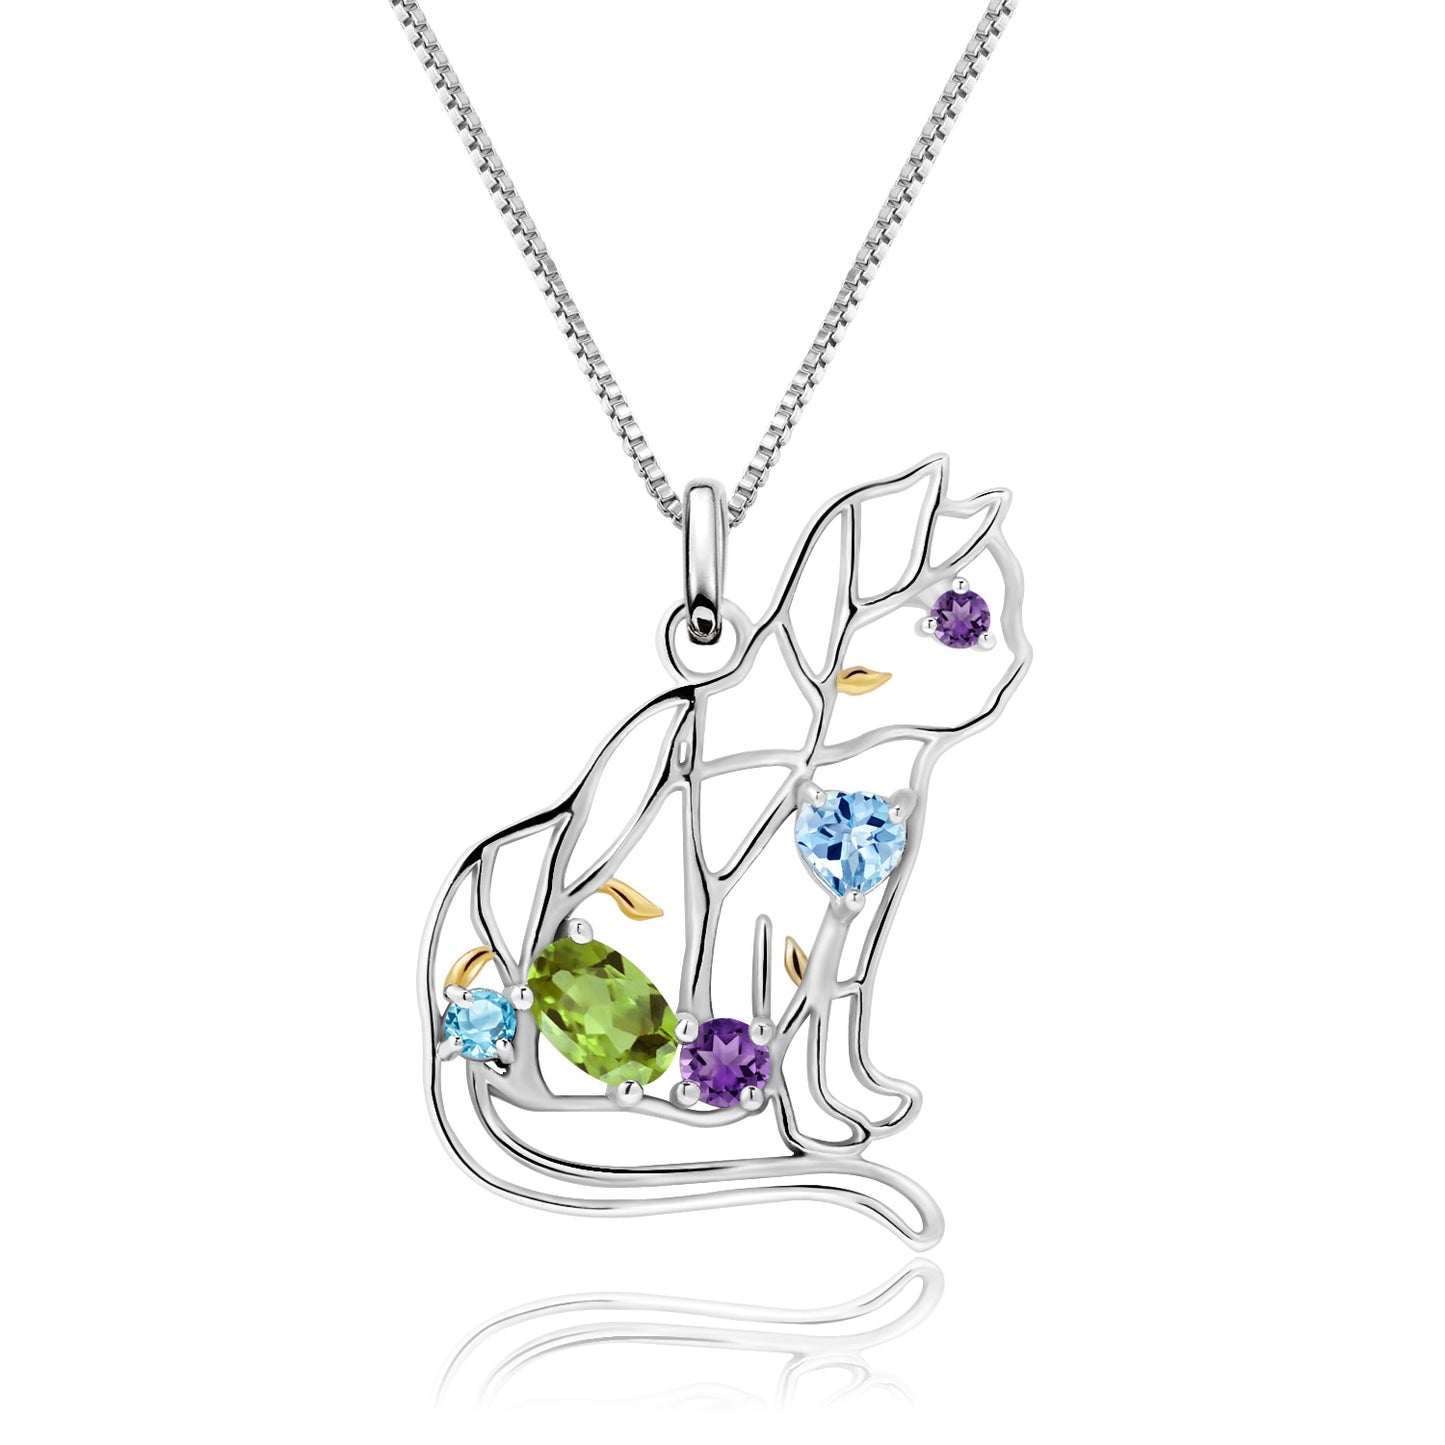 Cat Necklace in 925 Silver and Natural Stone